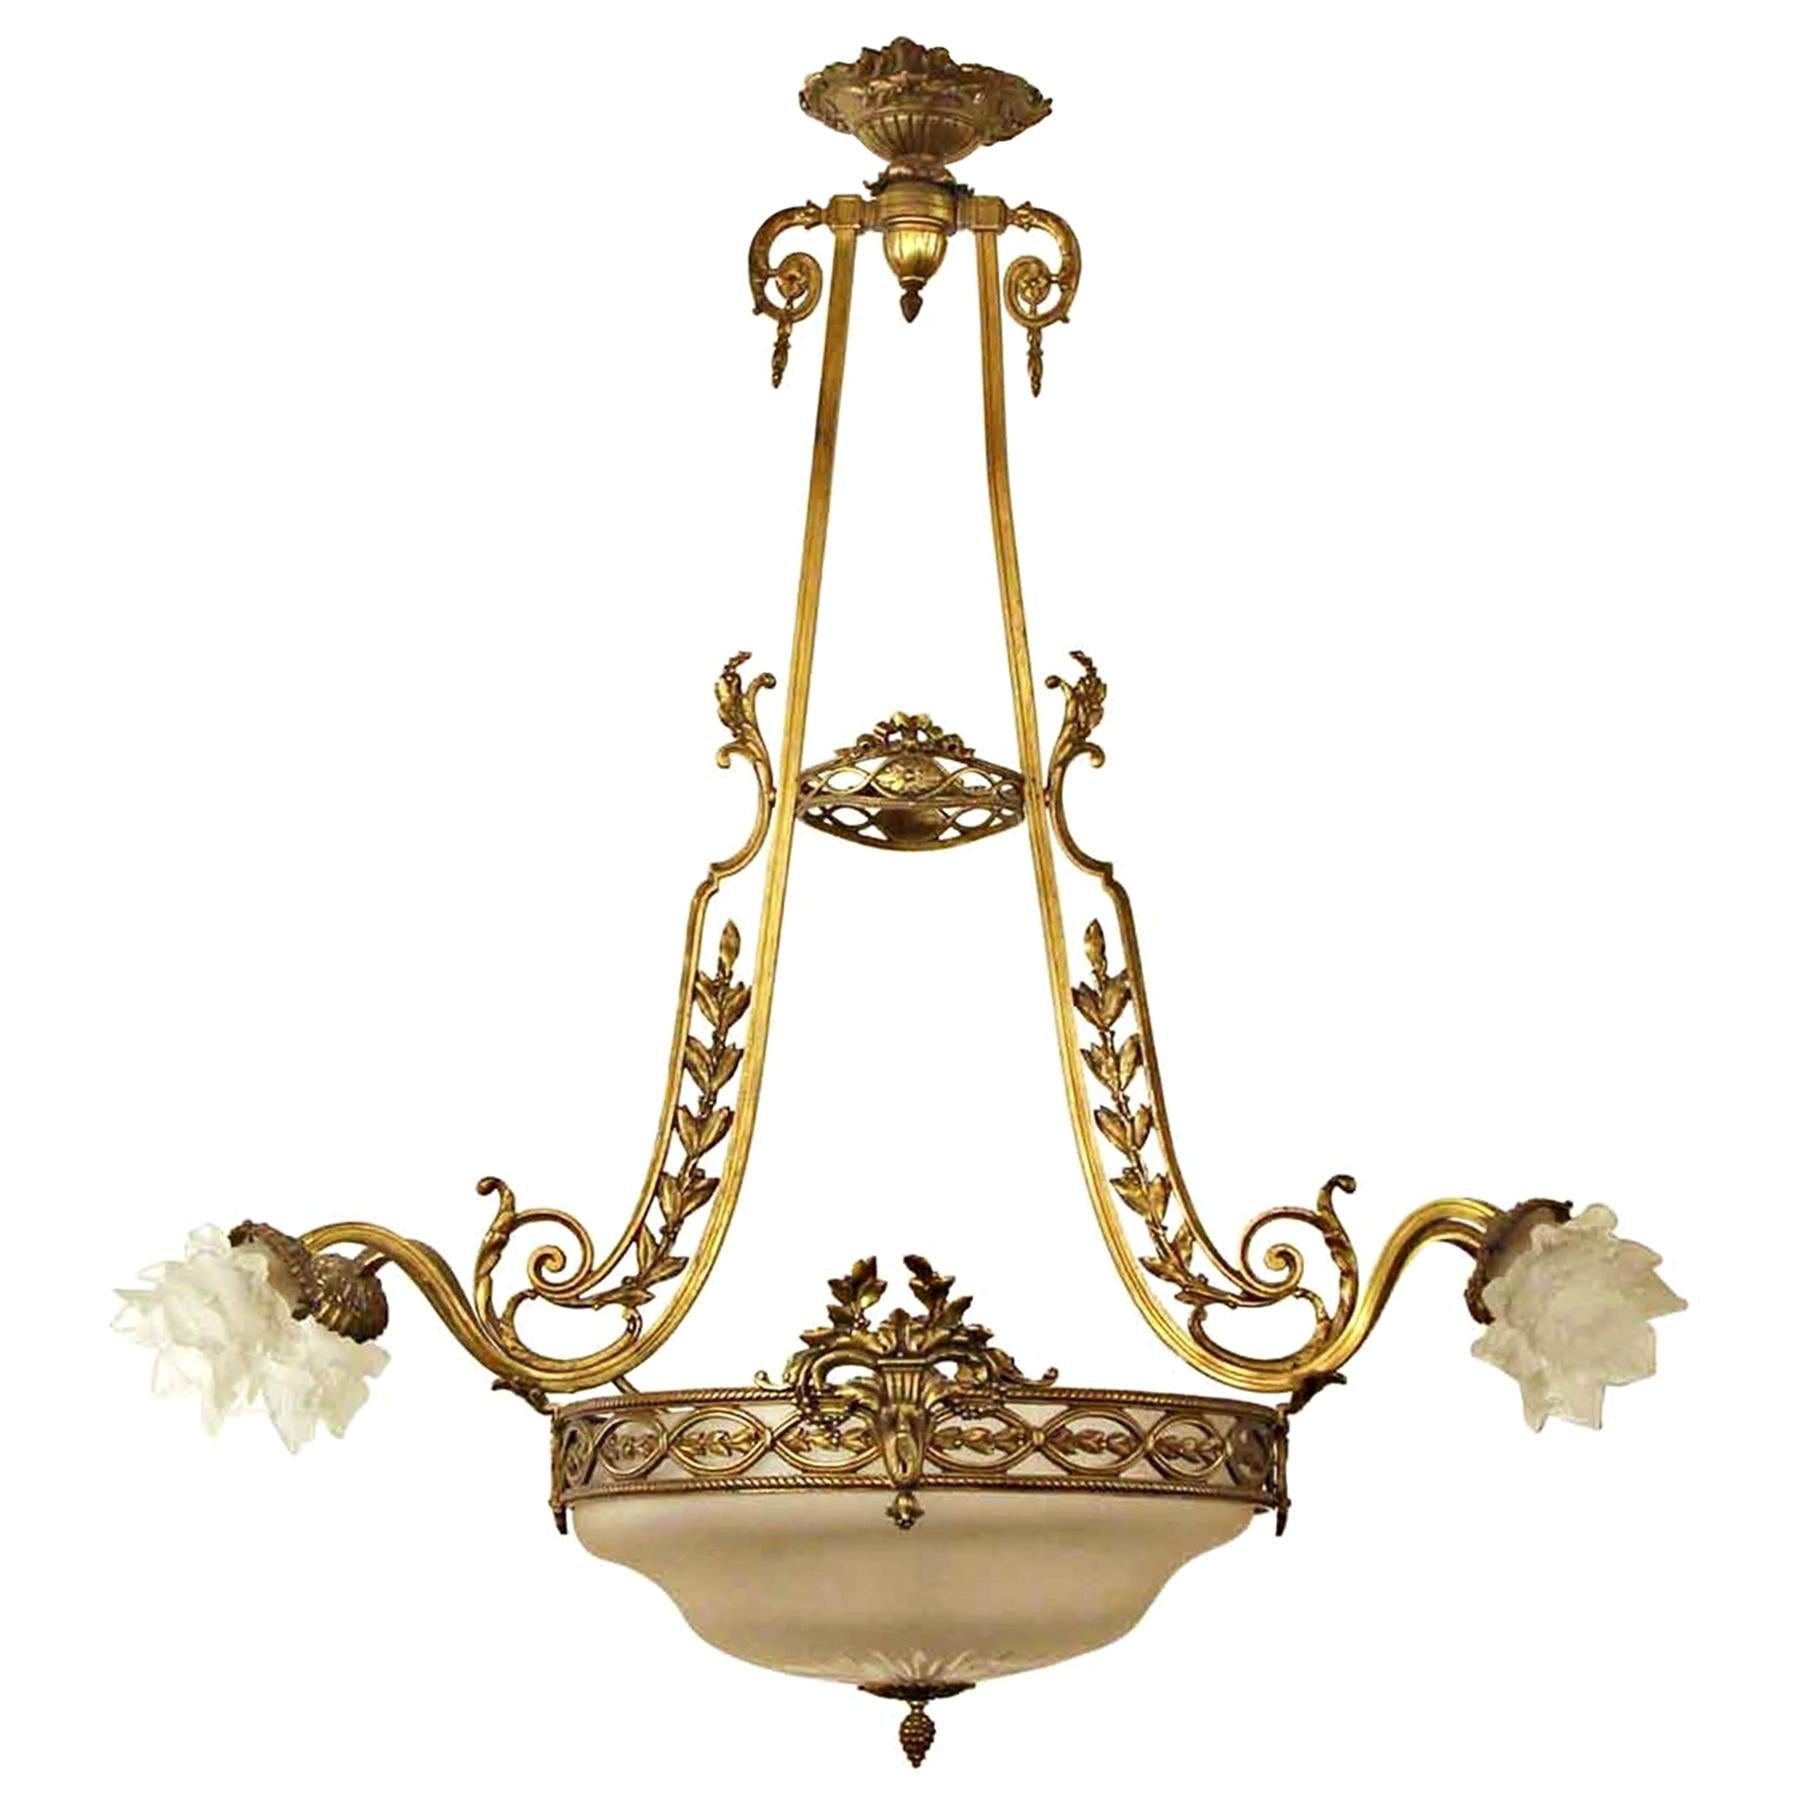 1920s Bronze Chandelier with Floral Frosted Glass Shades and Leaves